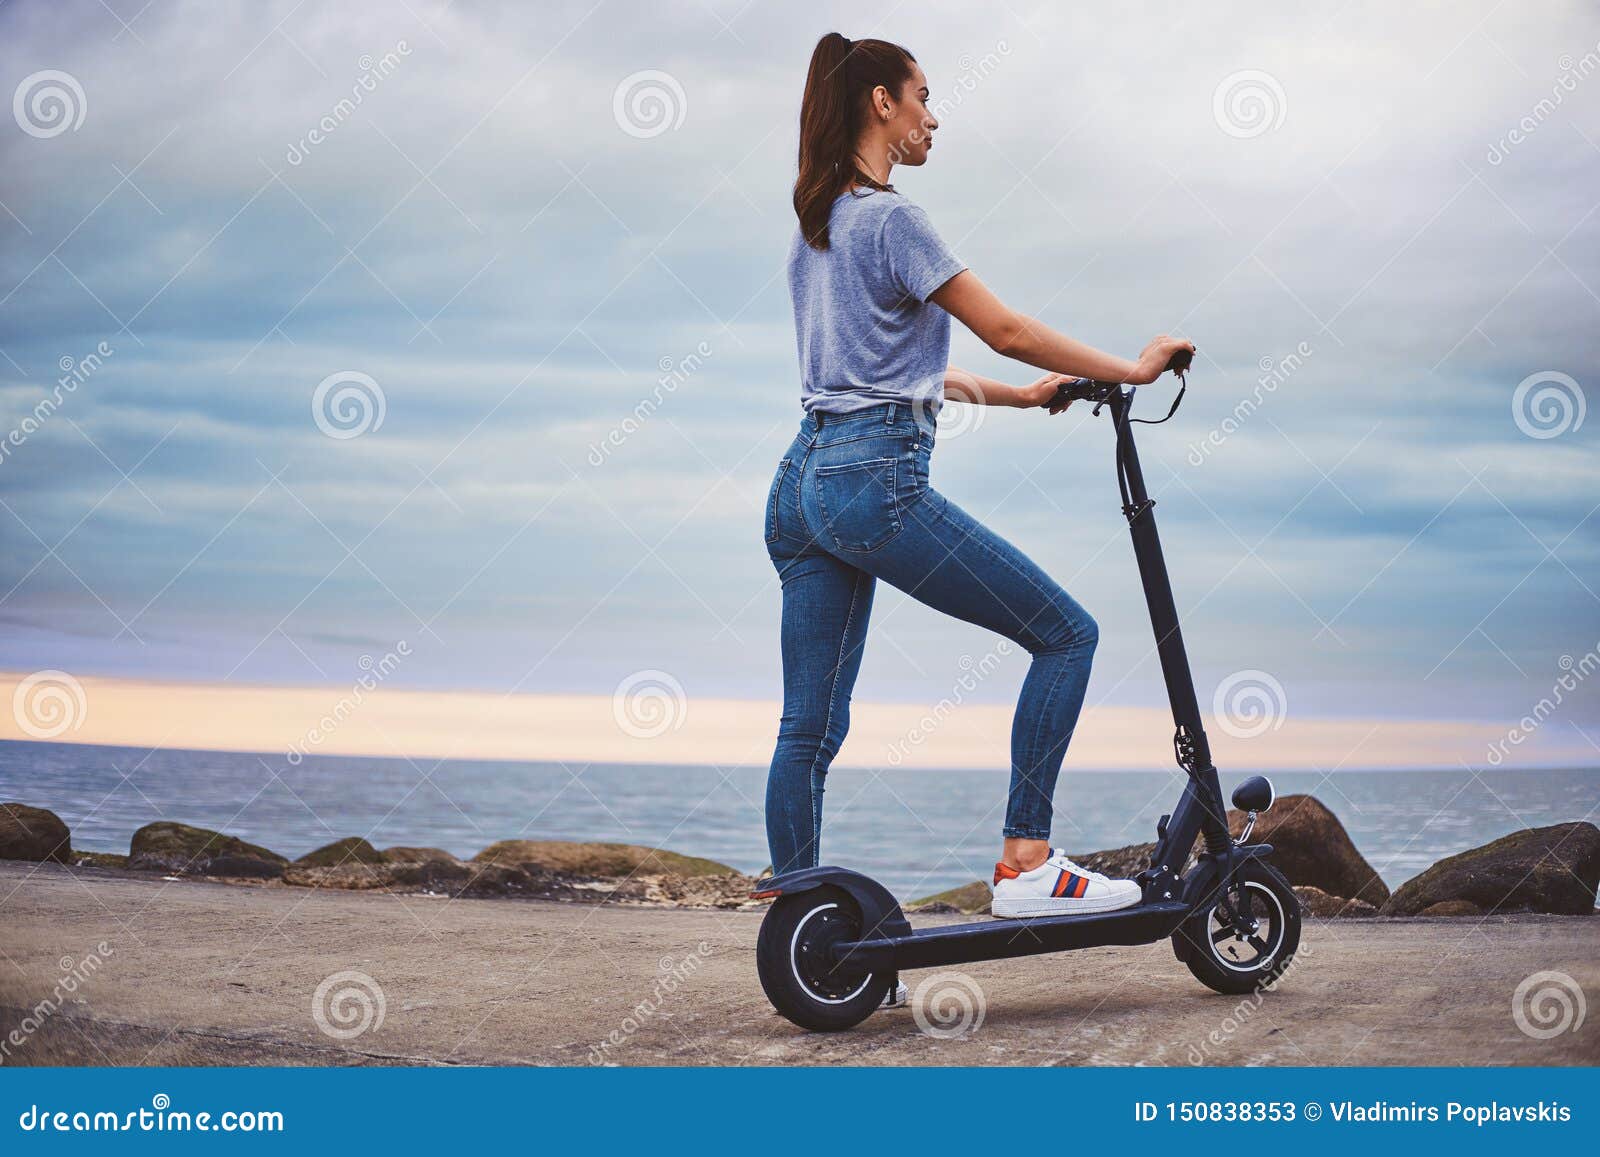 Sporty Woman is Riding Electro Scooter by Image - Image adult, person: